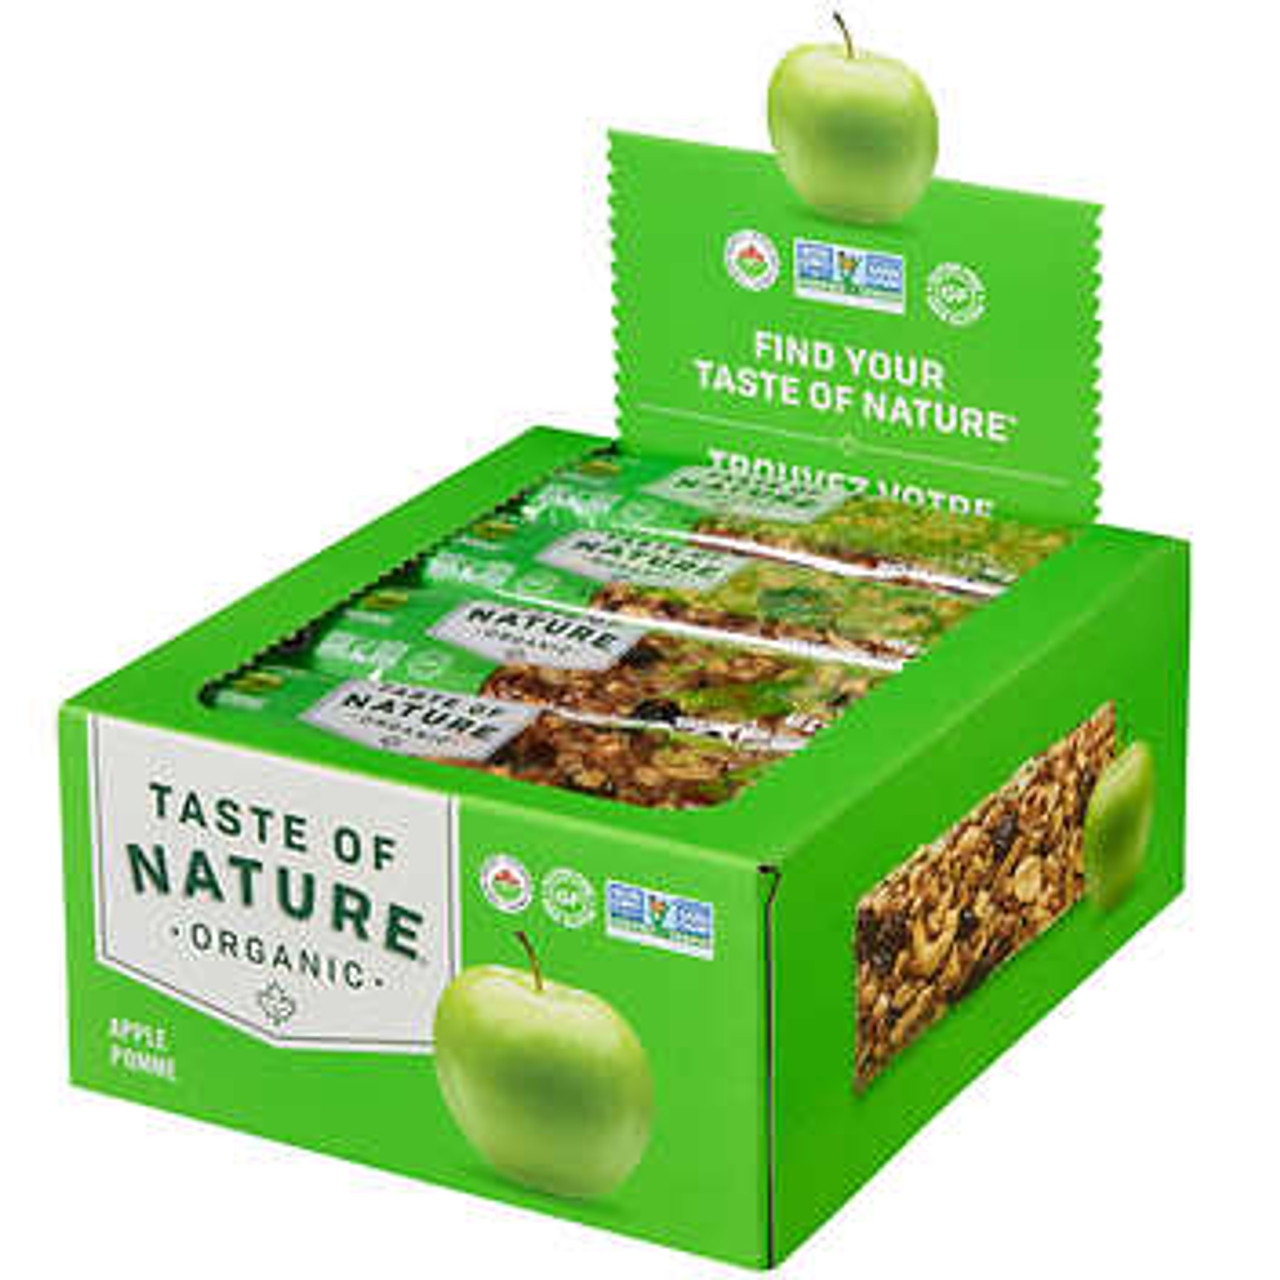 Taste of Nature Organic Apple Snack Bars - Nature's Goodness in Every Bite- Chicken Pieces